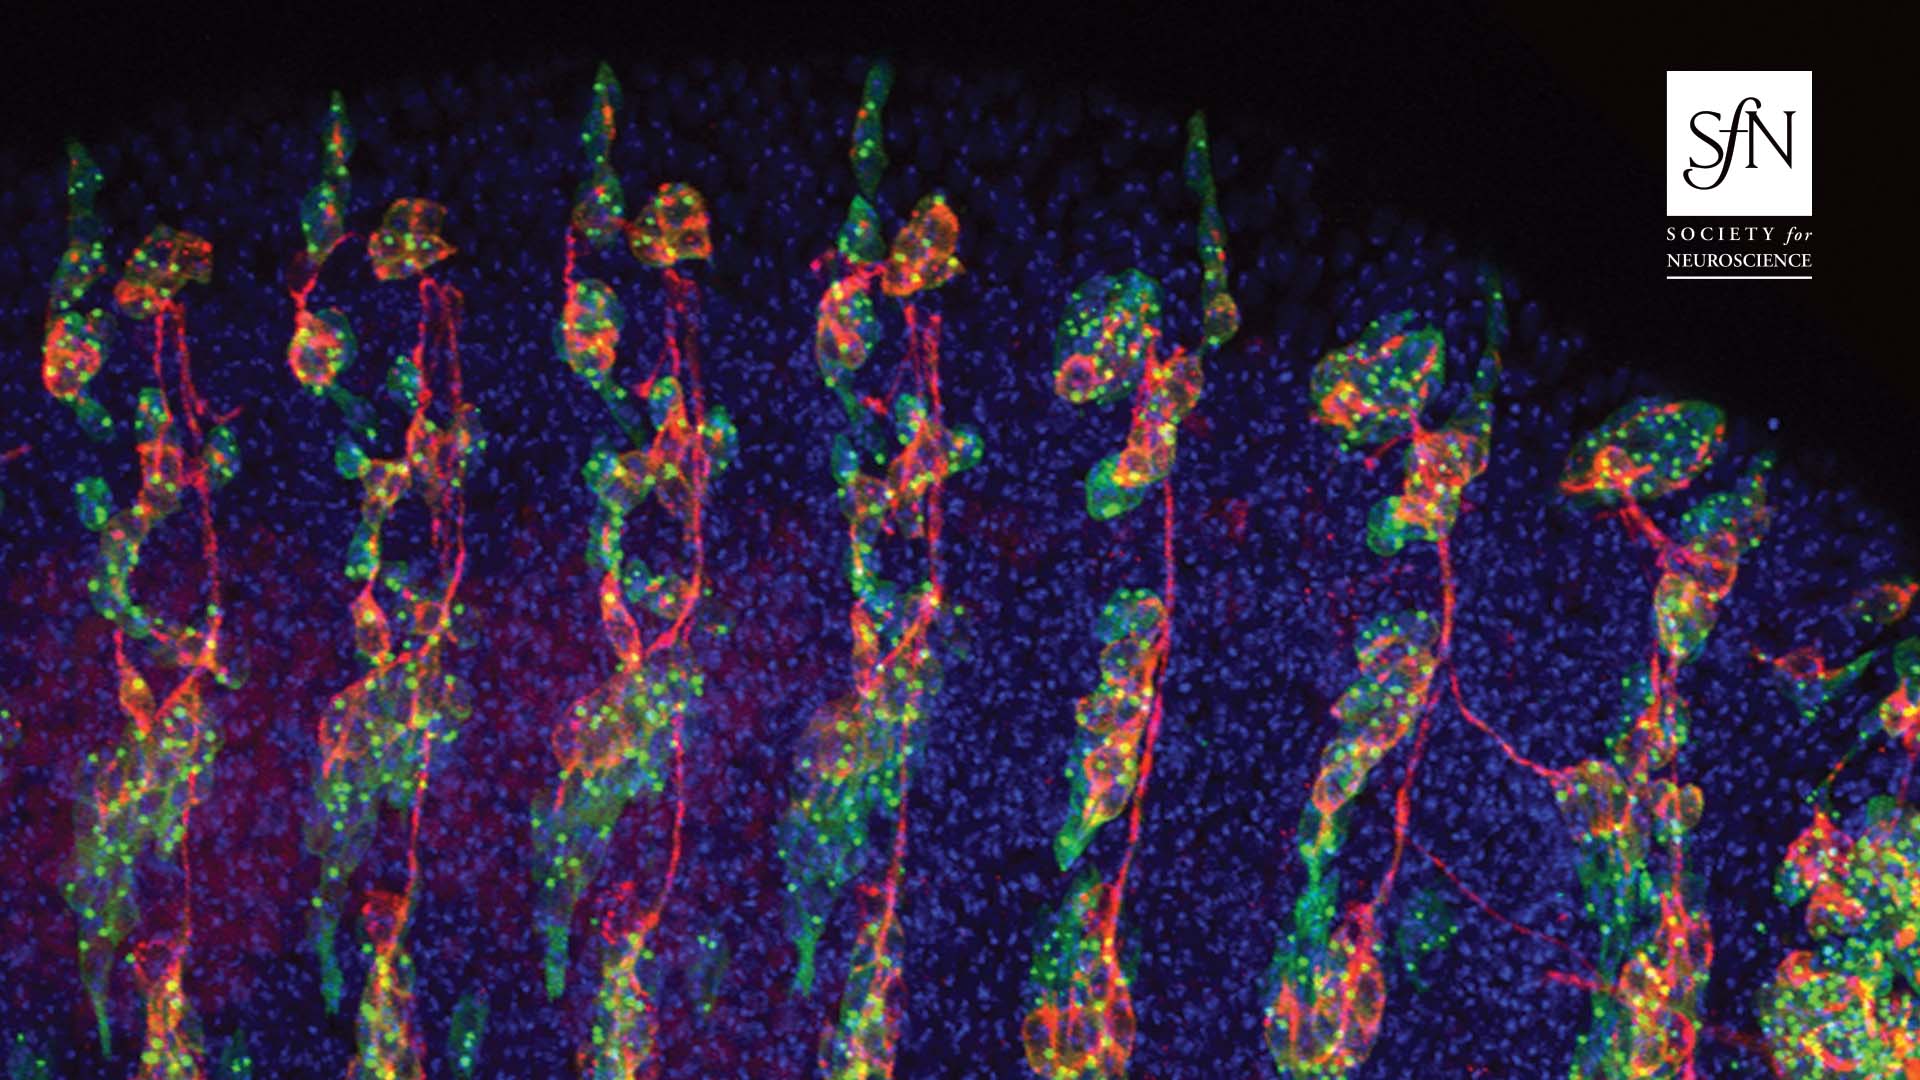 This image shows the expression of miR-263b in a stage-16 Drosophila embryo. Sensory neurons are shown in red, nuclei in blue (DAPI), and expression of the miR-263b driver in green. For more information, see the article by Klann et al. (pages 8297–8308). Cover image: Marleen Klann and edited by Claudio R. Alonso.